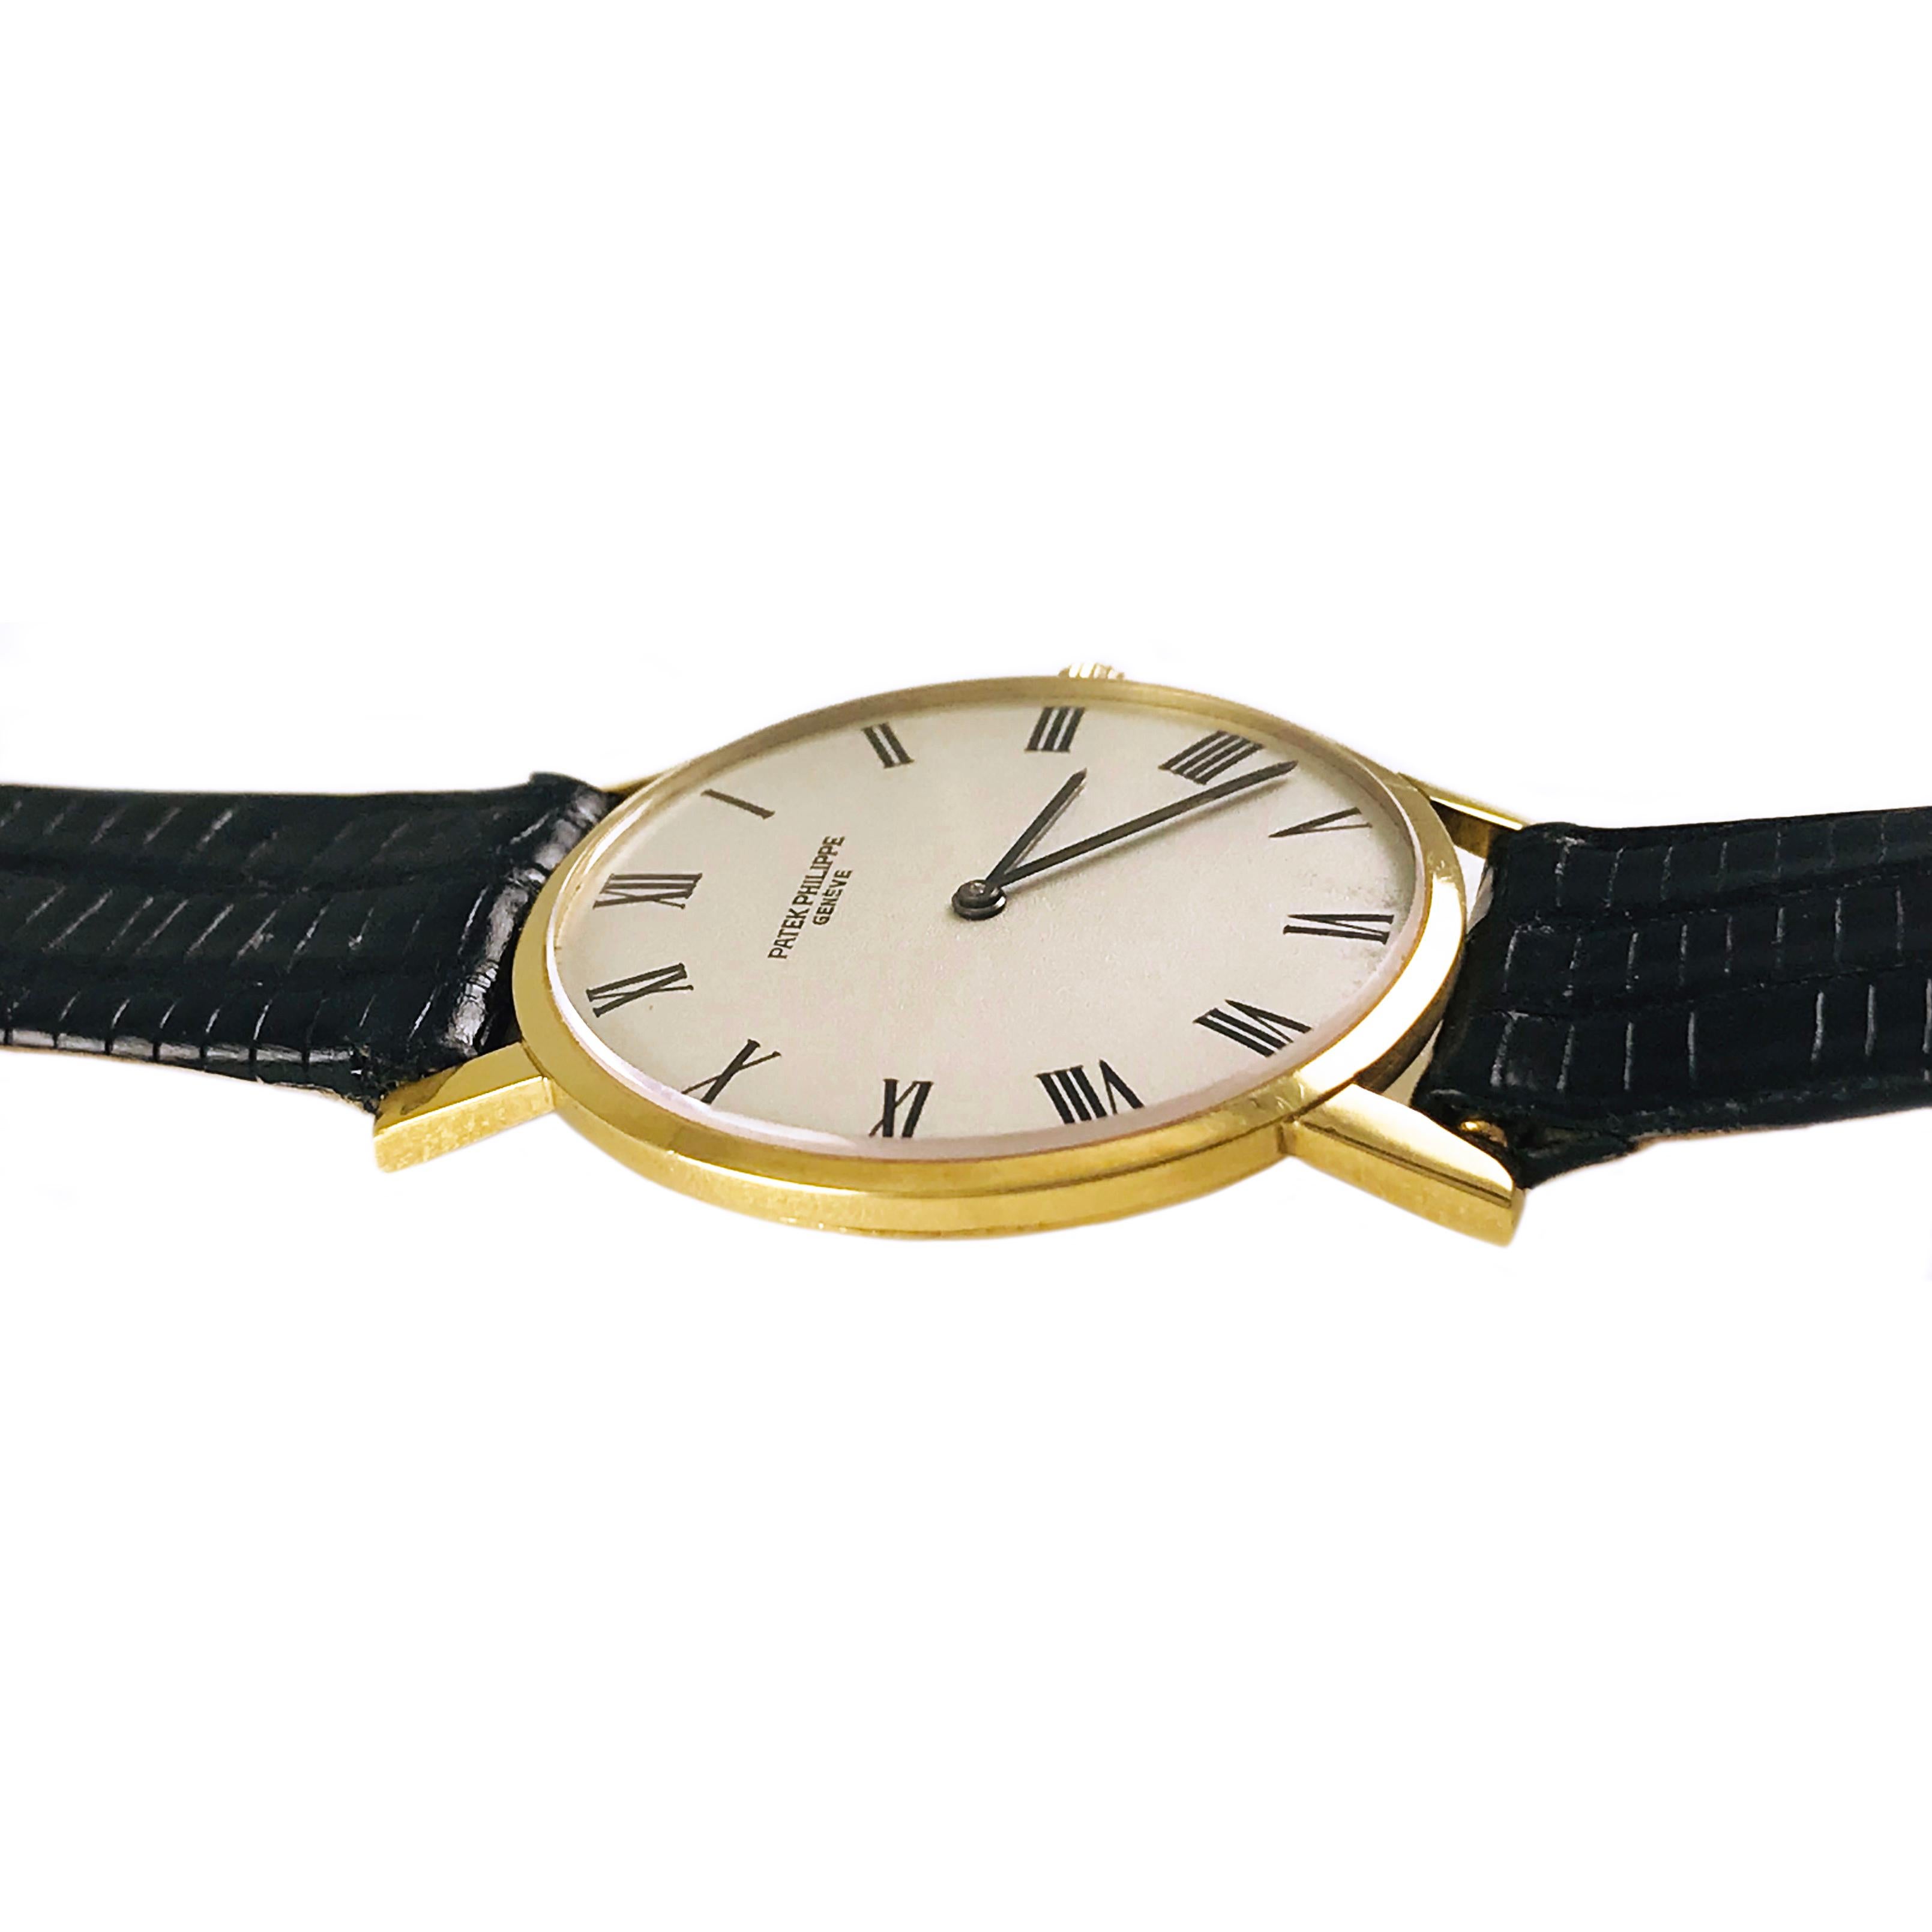 Patek Philippe Calatrava Ultra Thin 18 Karat Yellow Gold, 18 Jewel movement watch. This style watch is considered the flagship model of Patek Philippe. Black baton-style hour and minute hands on dial, manual wind movement. Serial #11324XX, Model